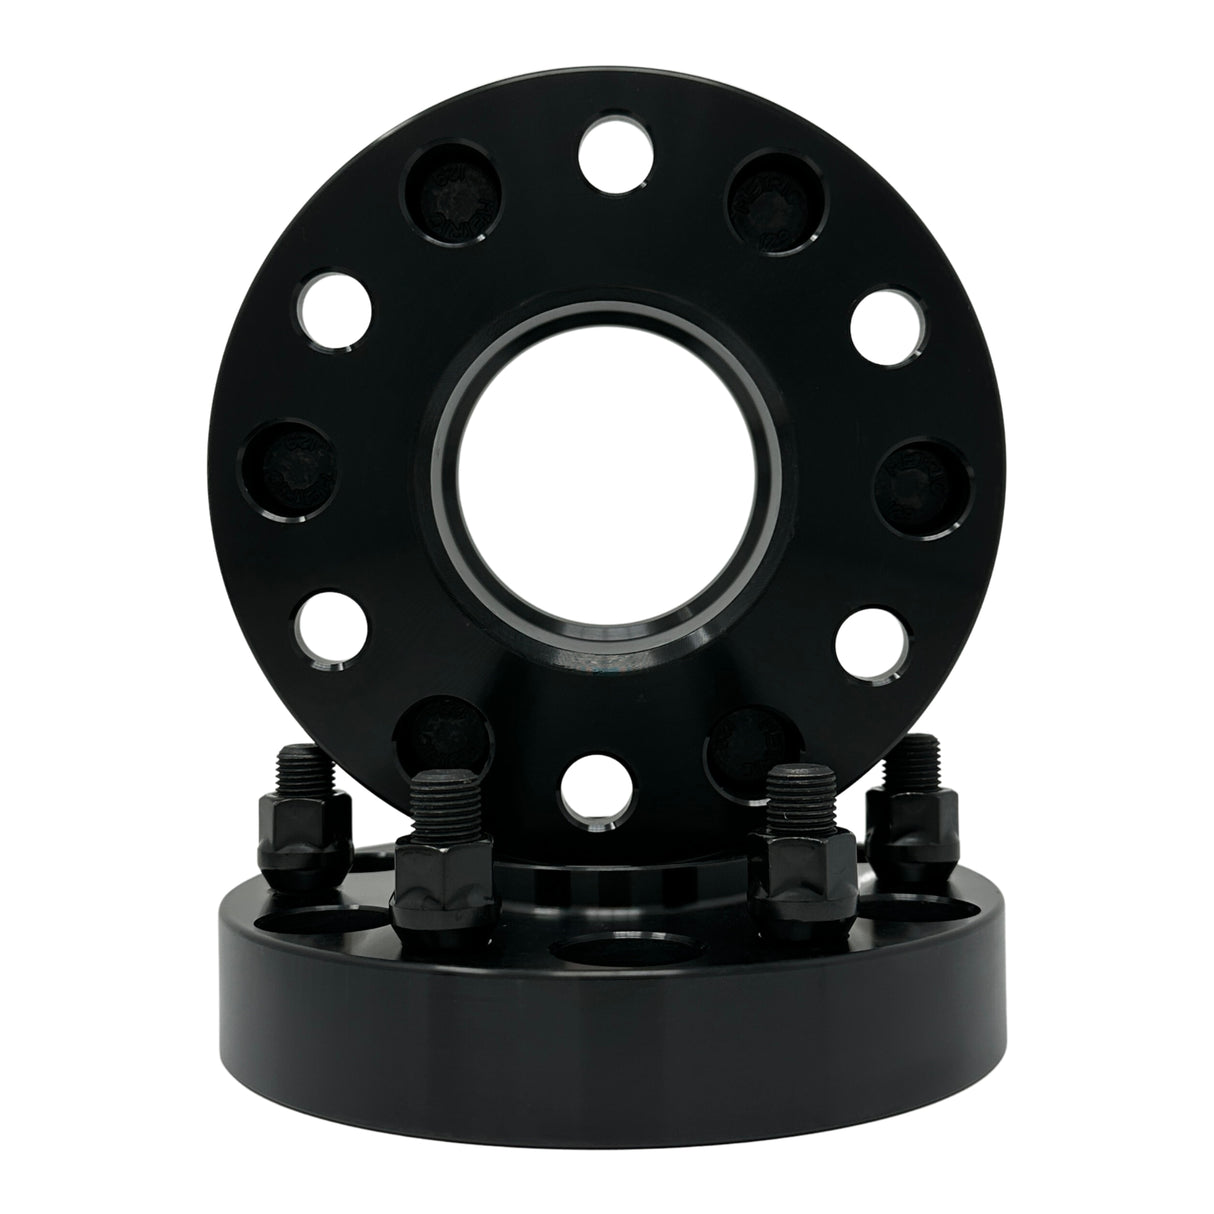 Chevy GMC 6x5.5 Hubcentric Wheel Spacers For Silverado, Sierra, Tahoe 6x139.7 | 78.1mm Centerbore | 14x1.5 Studs 1" Inch - 2" Inch Thicknesses Also Fits Yukon, Escalade + More